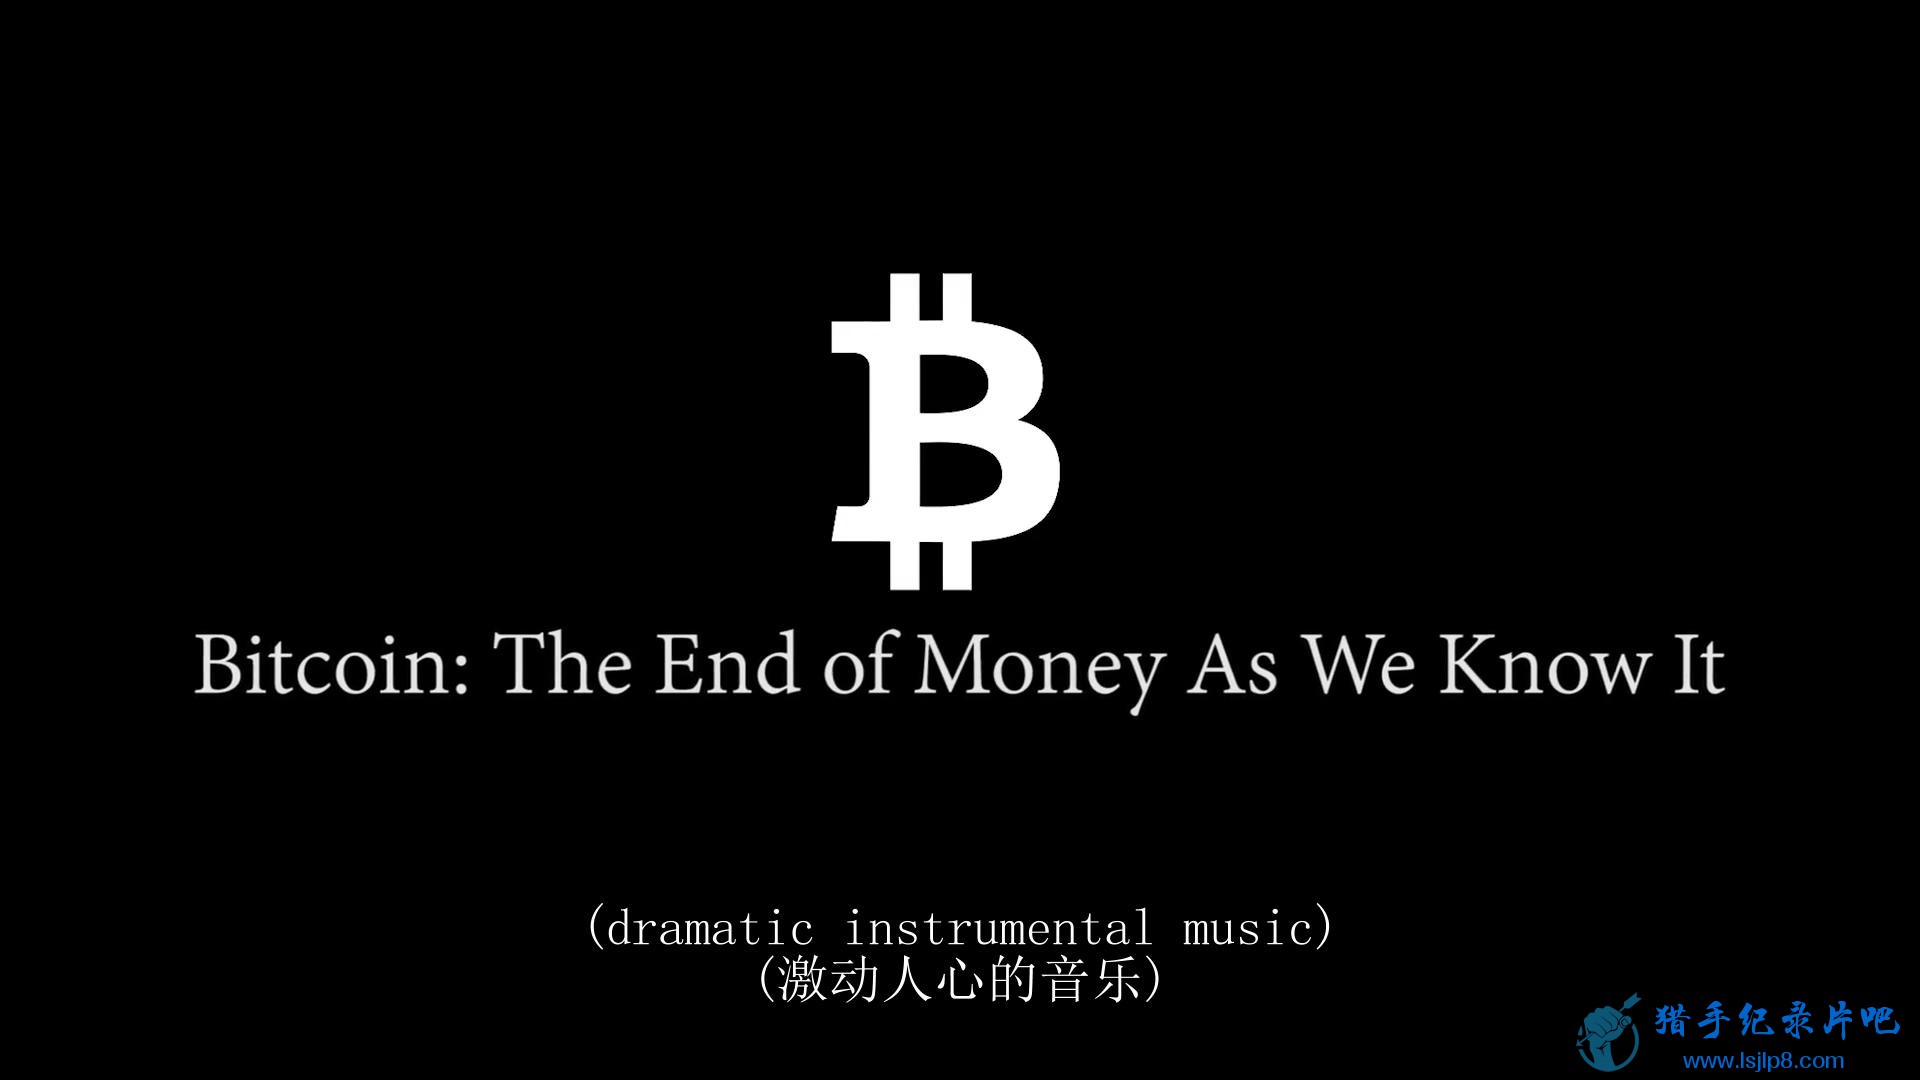 Bitcoin.The.End.of.Money.as.We.Know.It.2015.DOCU.1080p.HDRip.x264.AAC2.0-FGT_201.jpg